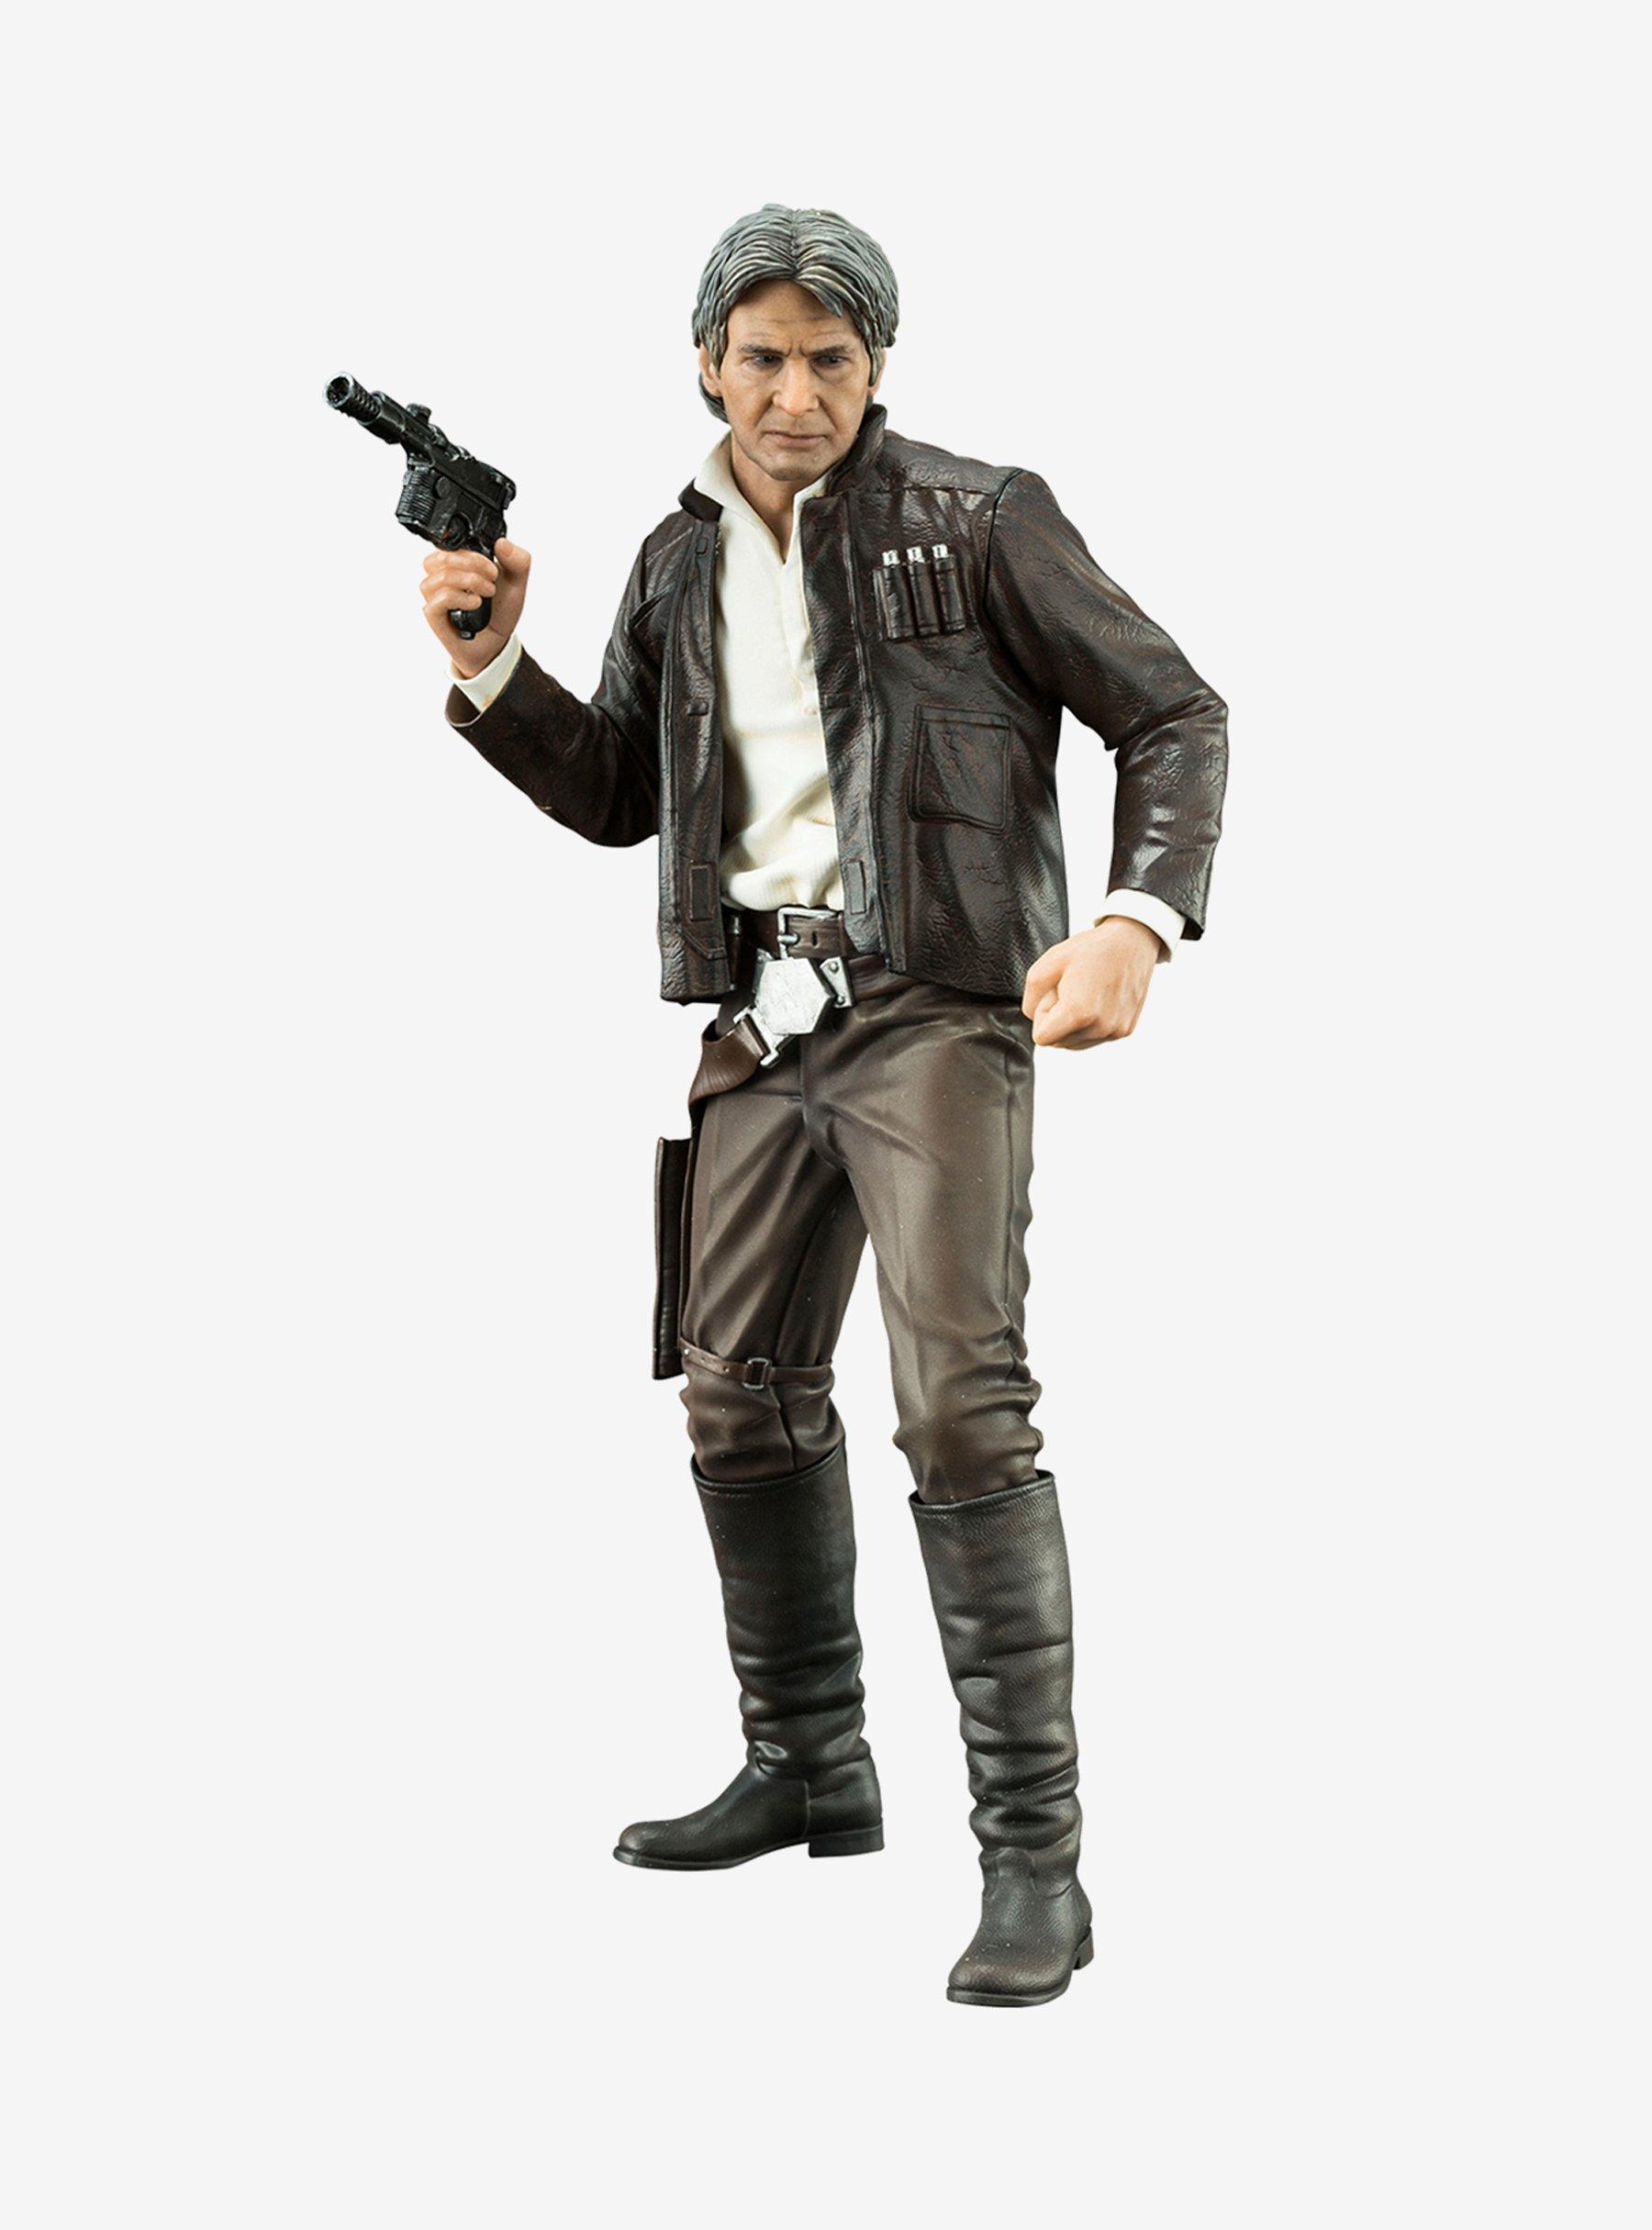 Star Wars: The Force Awakens Han Solo And Chewbacca ARTFX+ Statue Set, , alternate